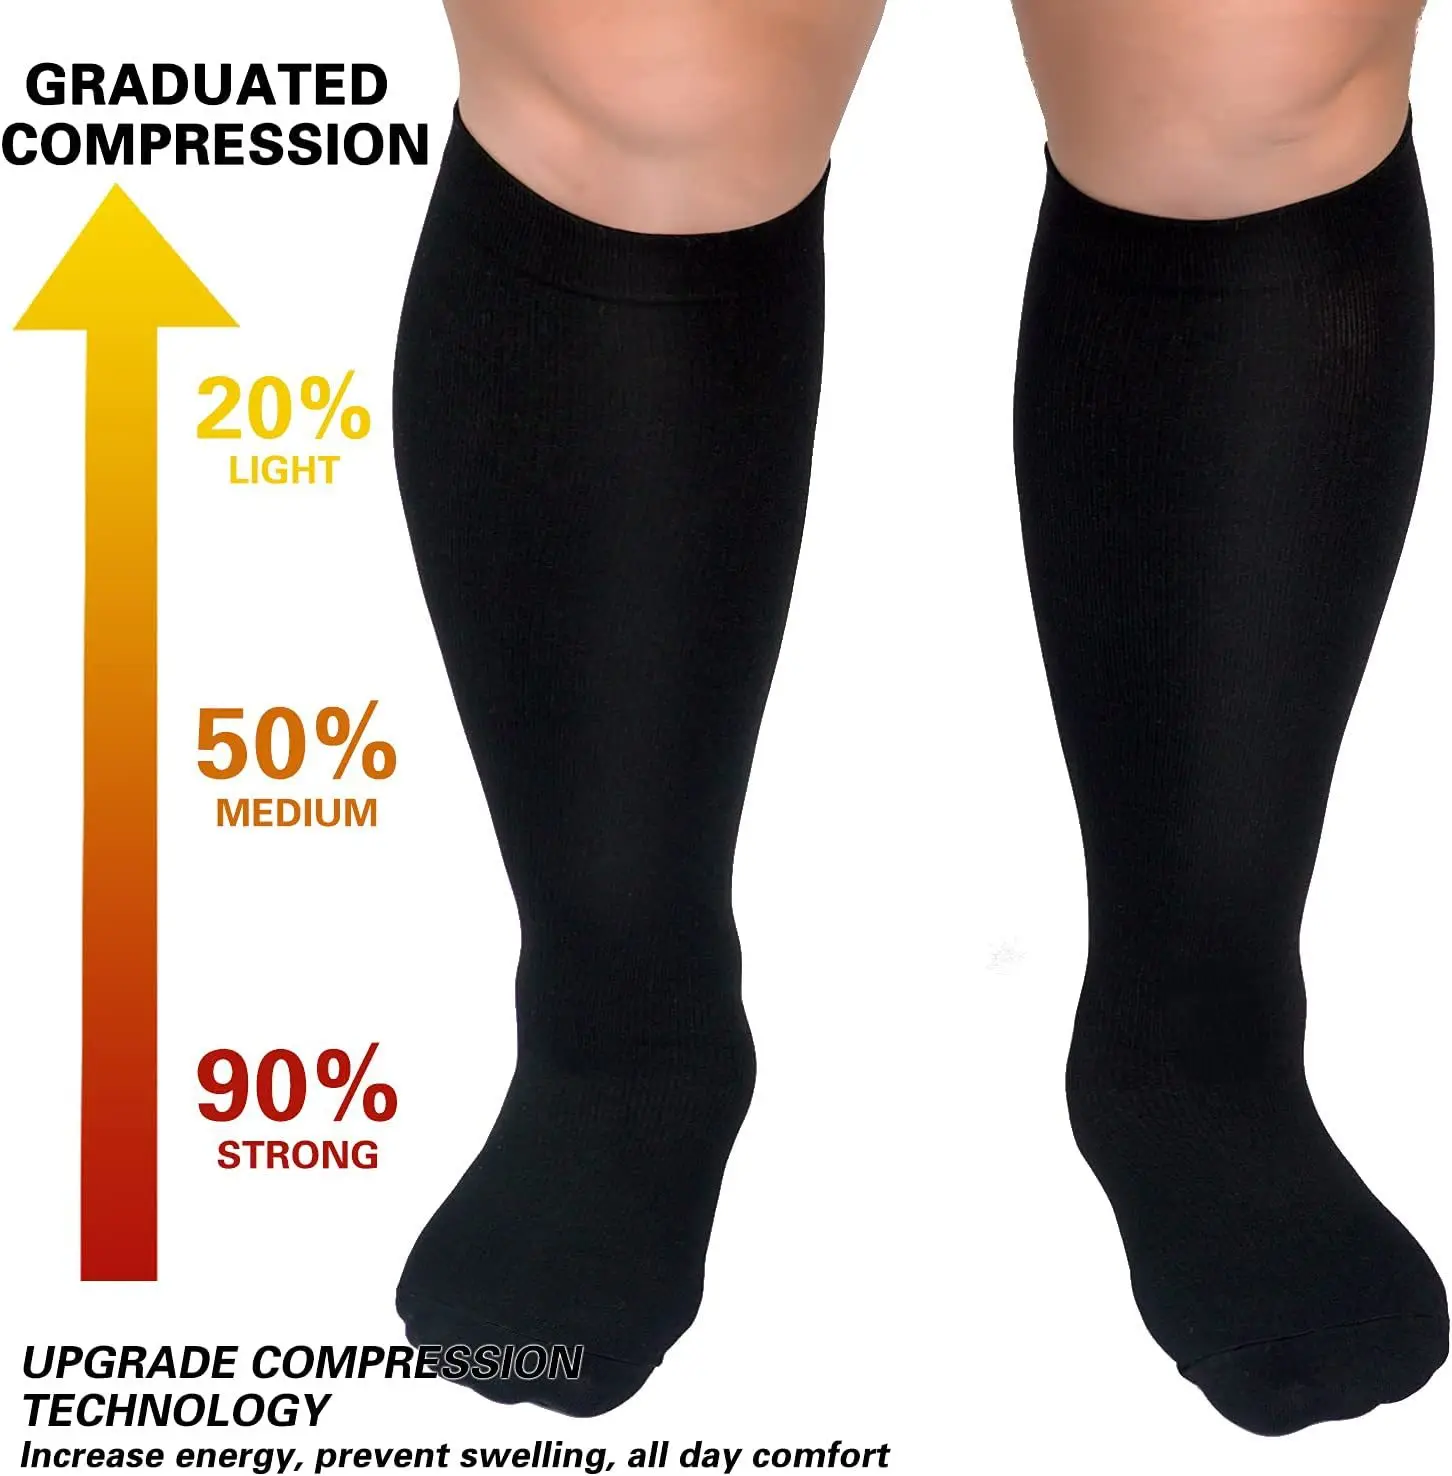 Wide Calf Compression Socks for Women & Men 20-30 mmhg Extra Large Size Support Socks for Nurses Knee High Stockings 2XL 3XL 4XL